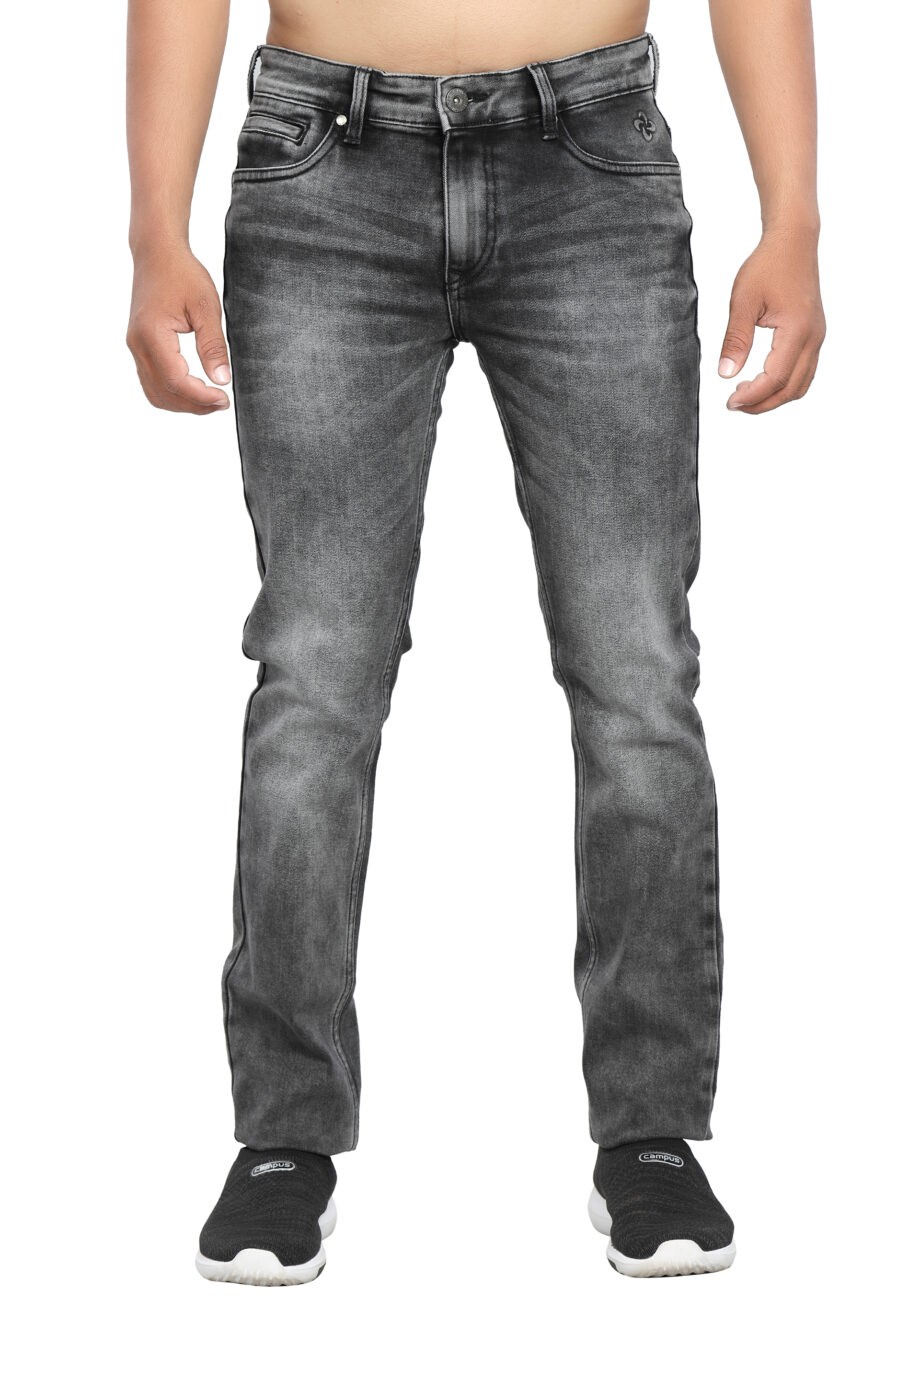 Stretchable Grey jeans pant for men